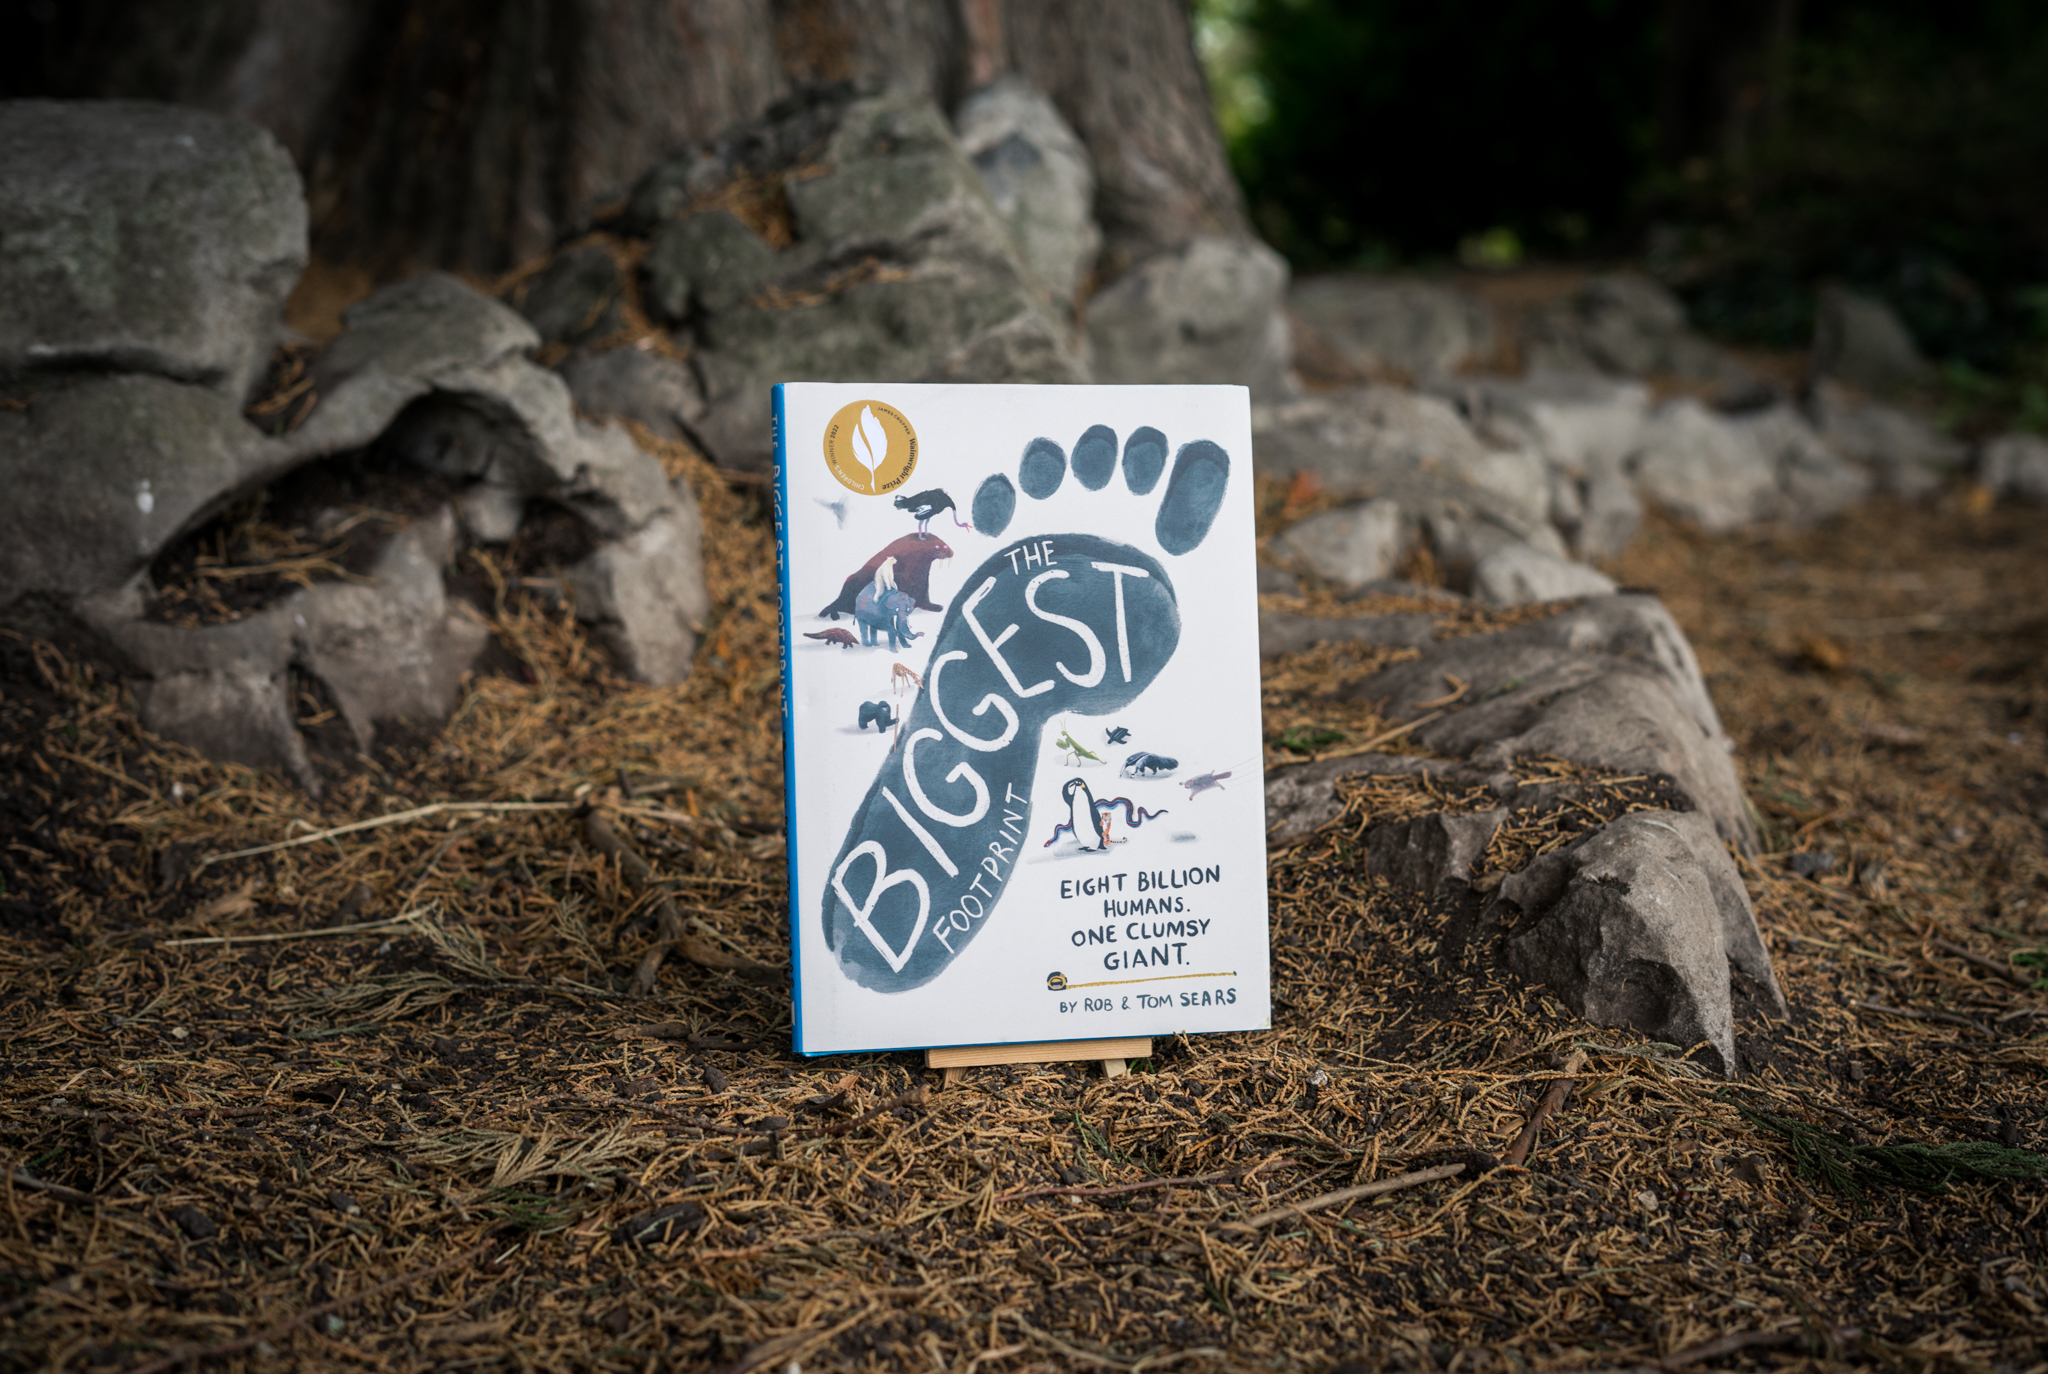 The Biggest Footprint by Rob & Tom Sears, Winner of the 2022 James Cropper Wainwright Prize for Children